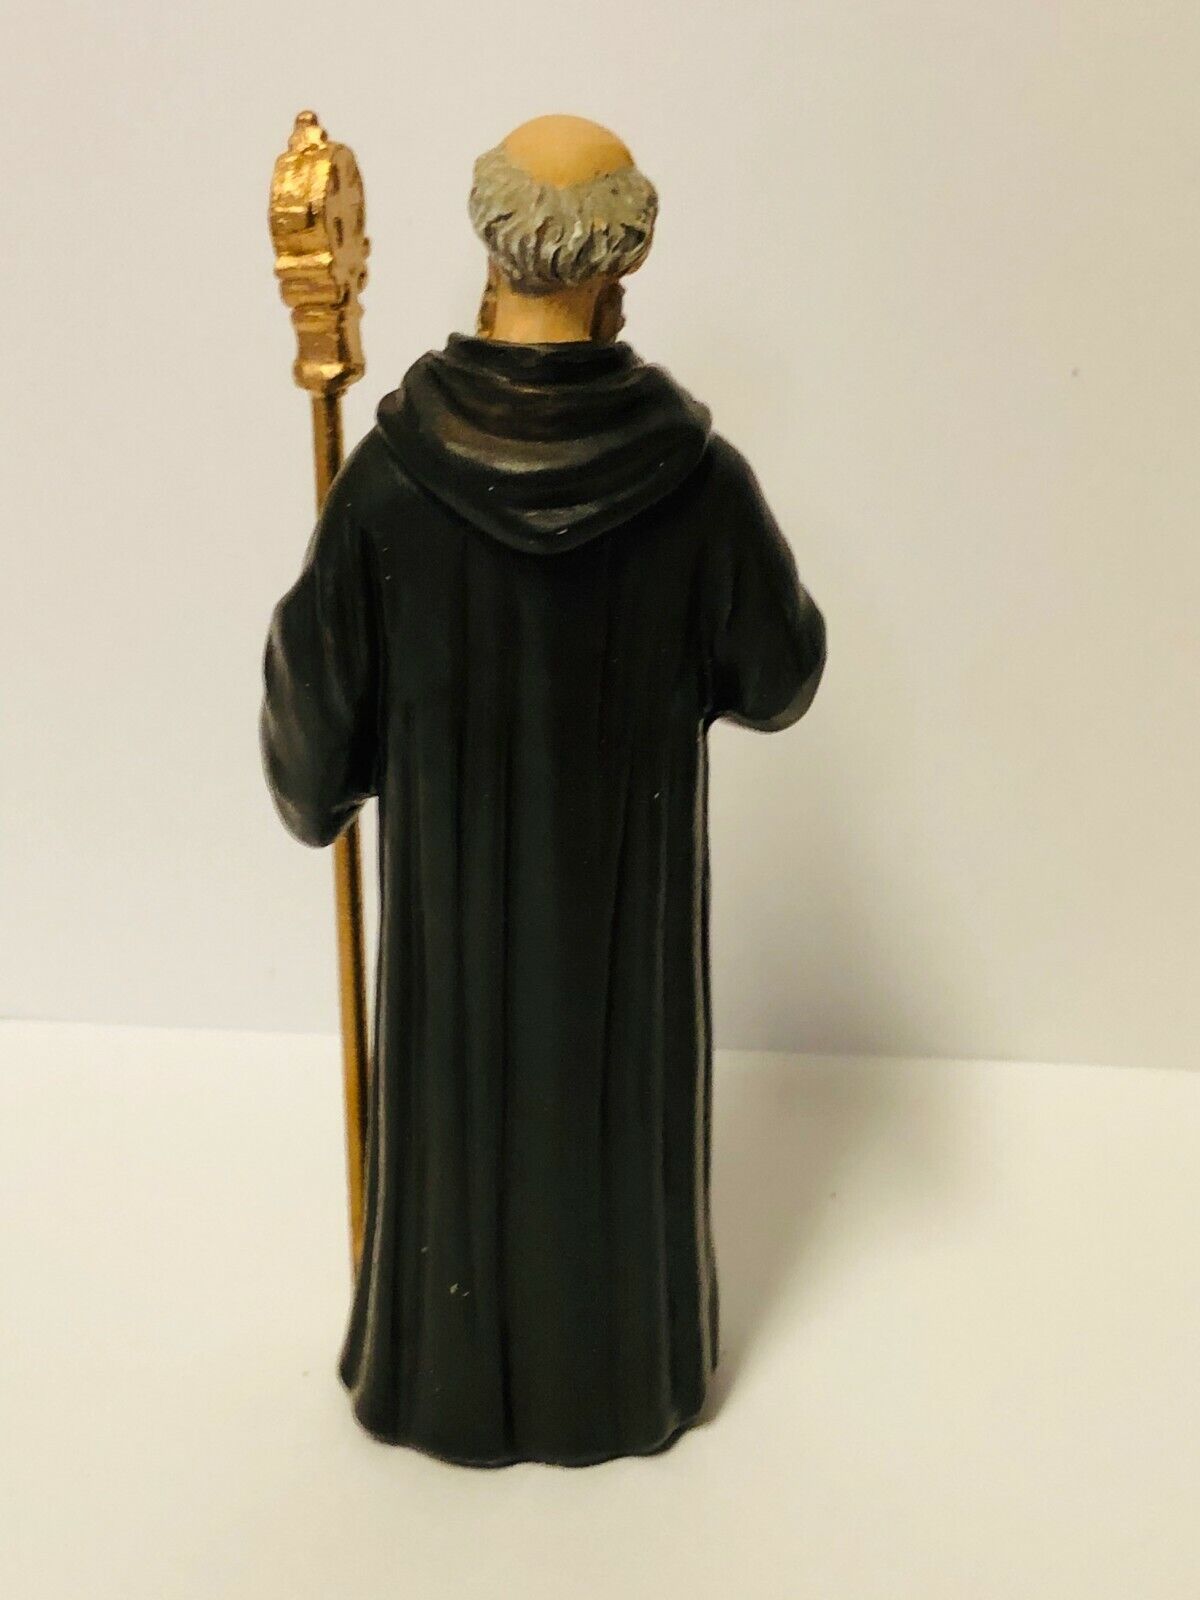 Saint Benedict  4" Statue + Prayer Card, New - Bob and Penny Lord